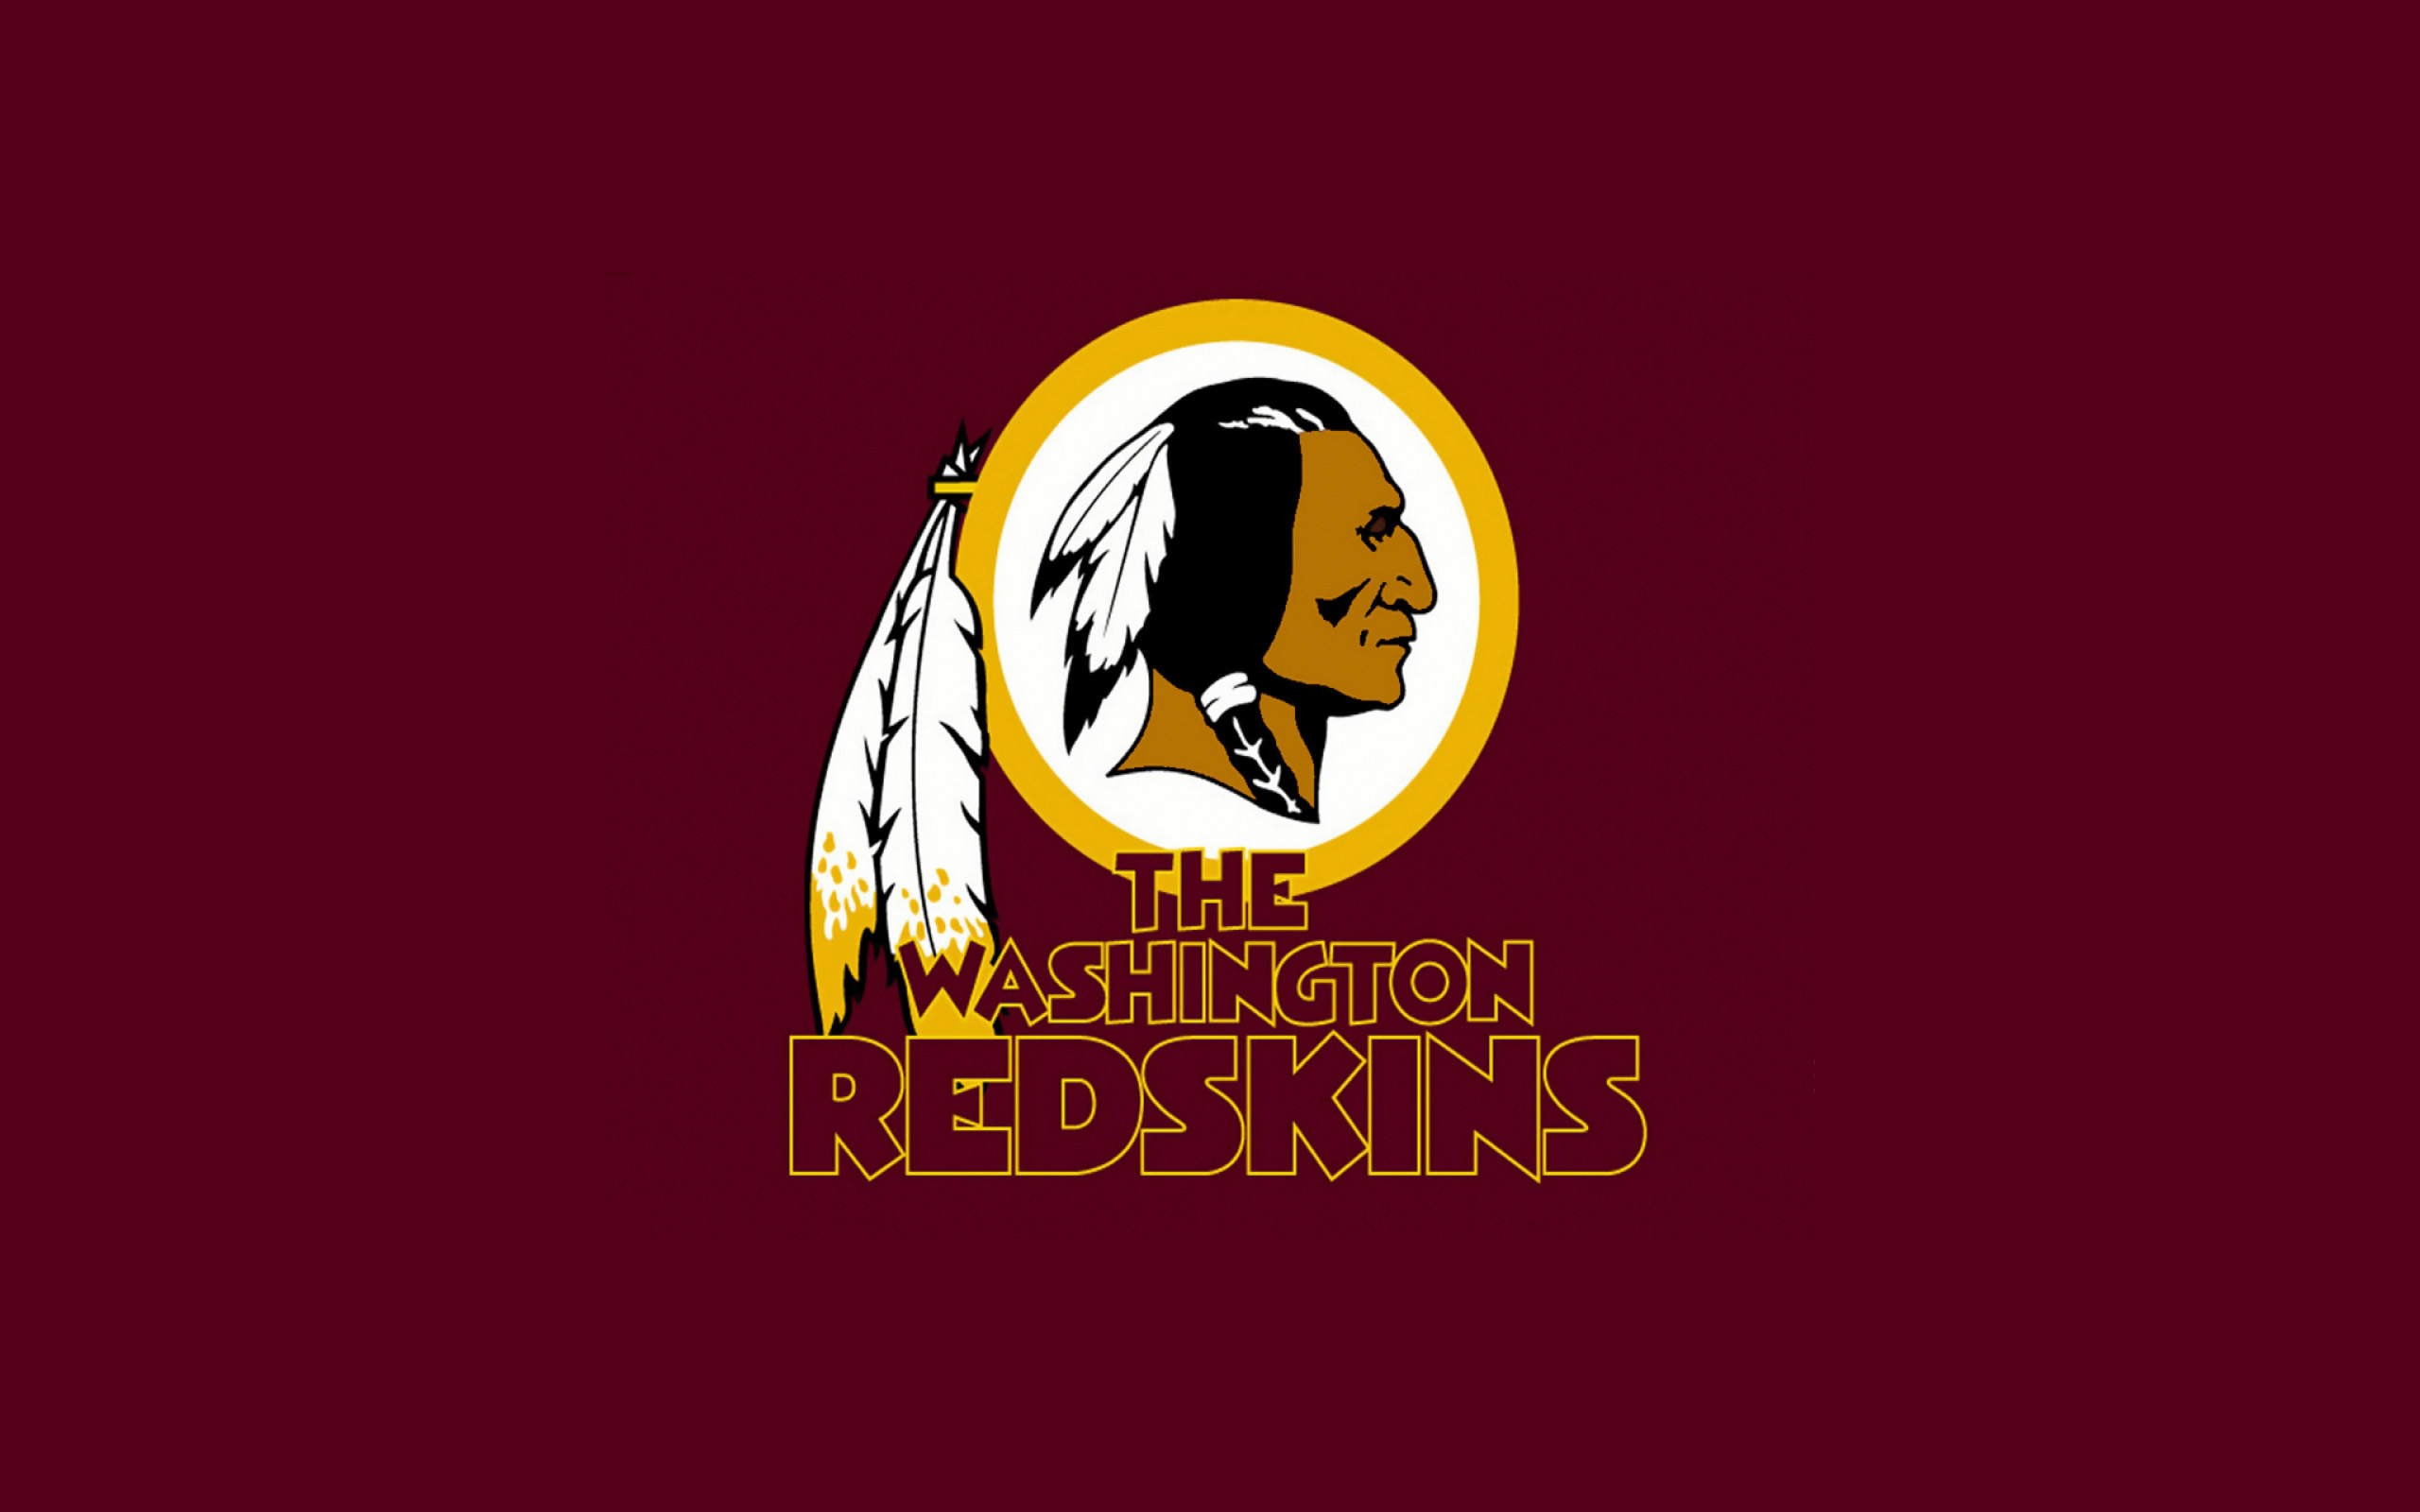 to show support your favorite NFC East division NFL football team